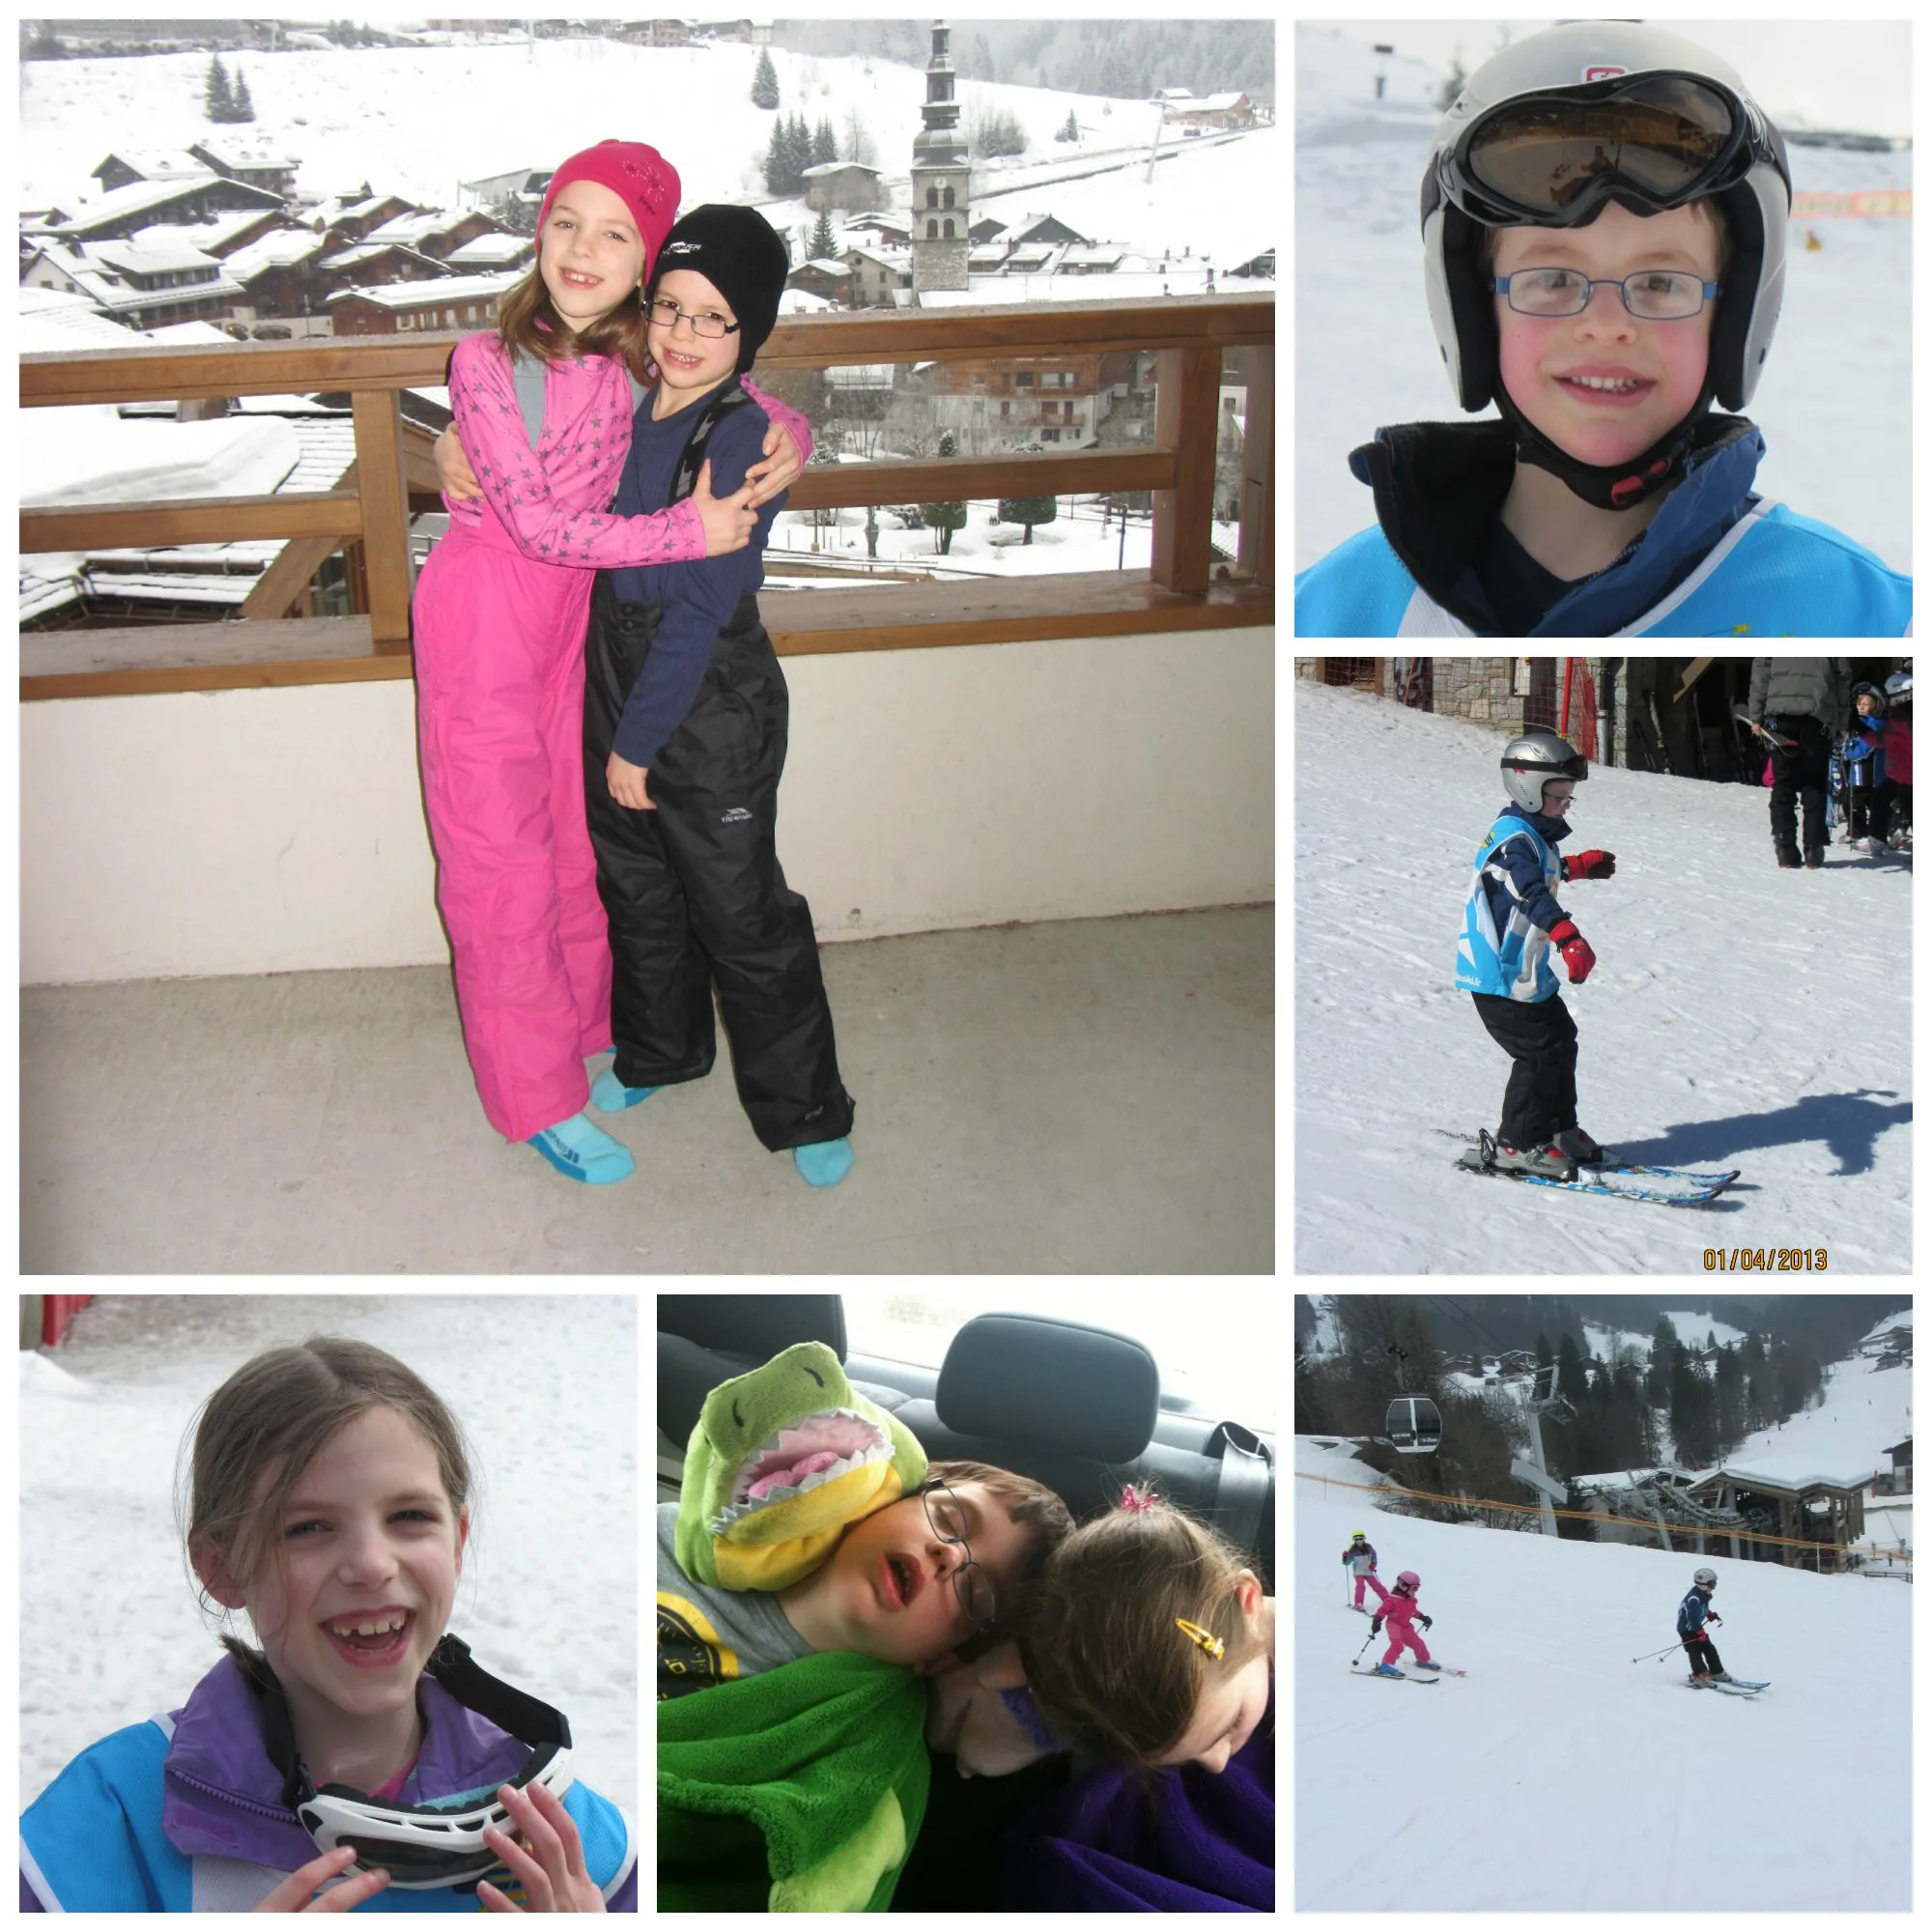 Skiing with kids: We had a great time!